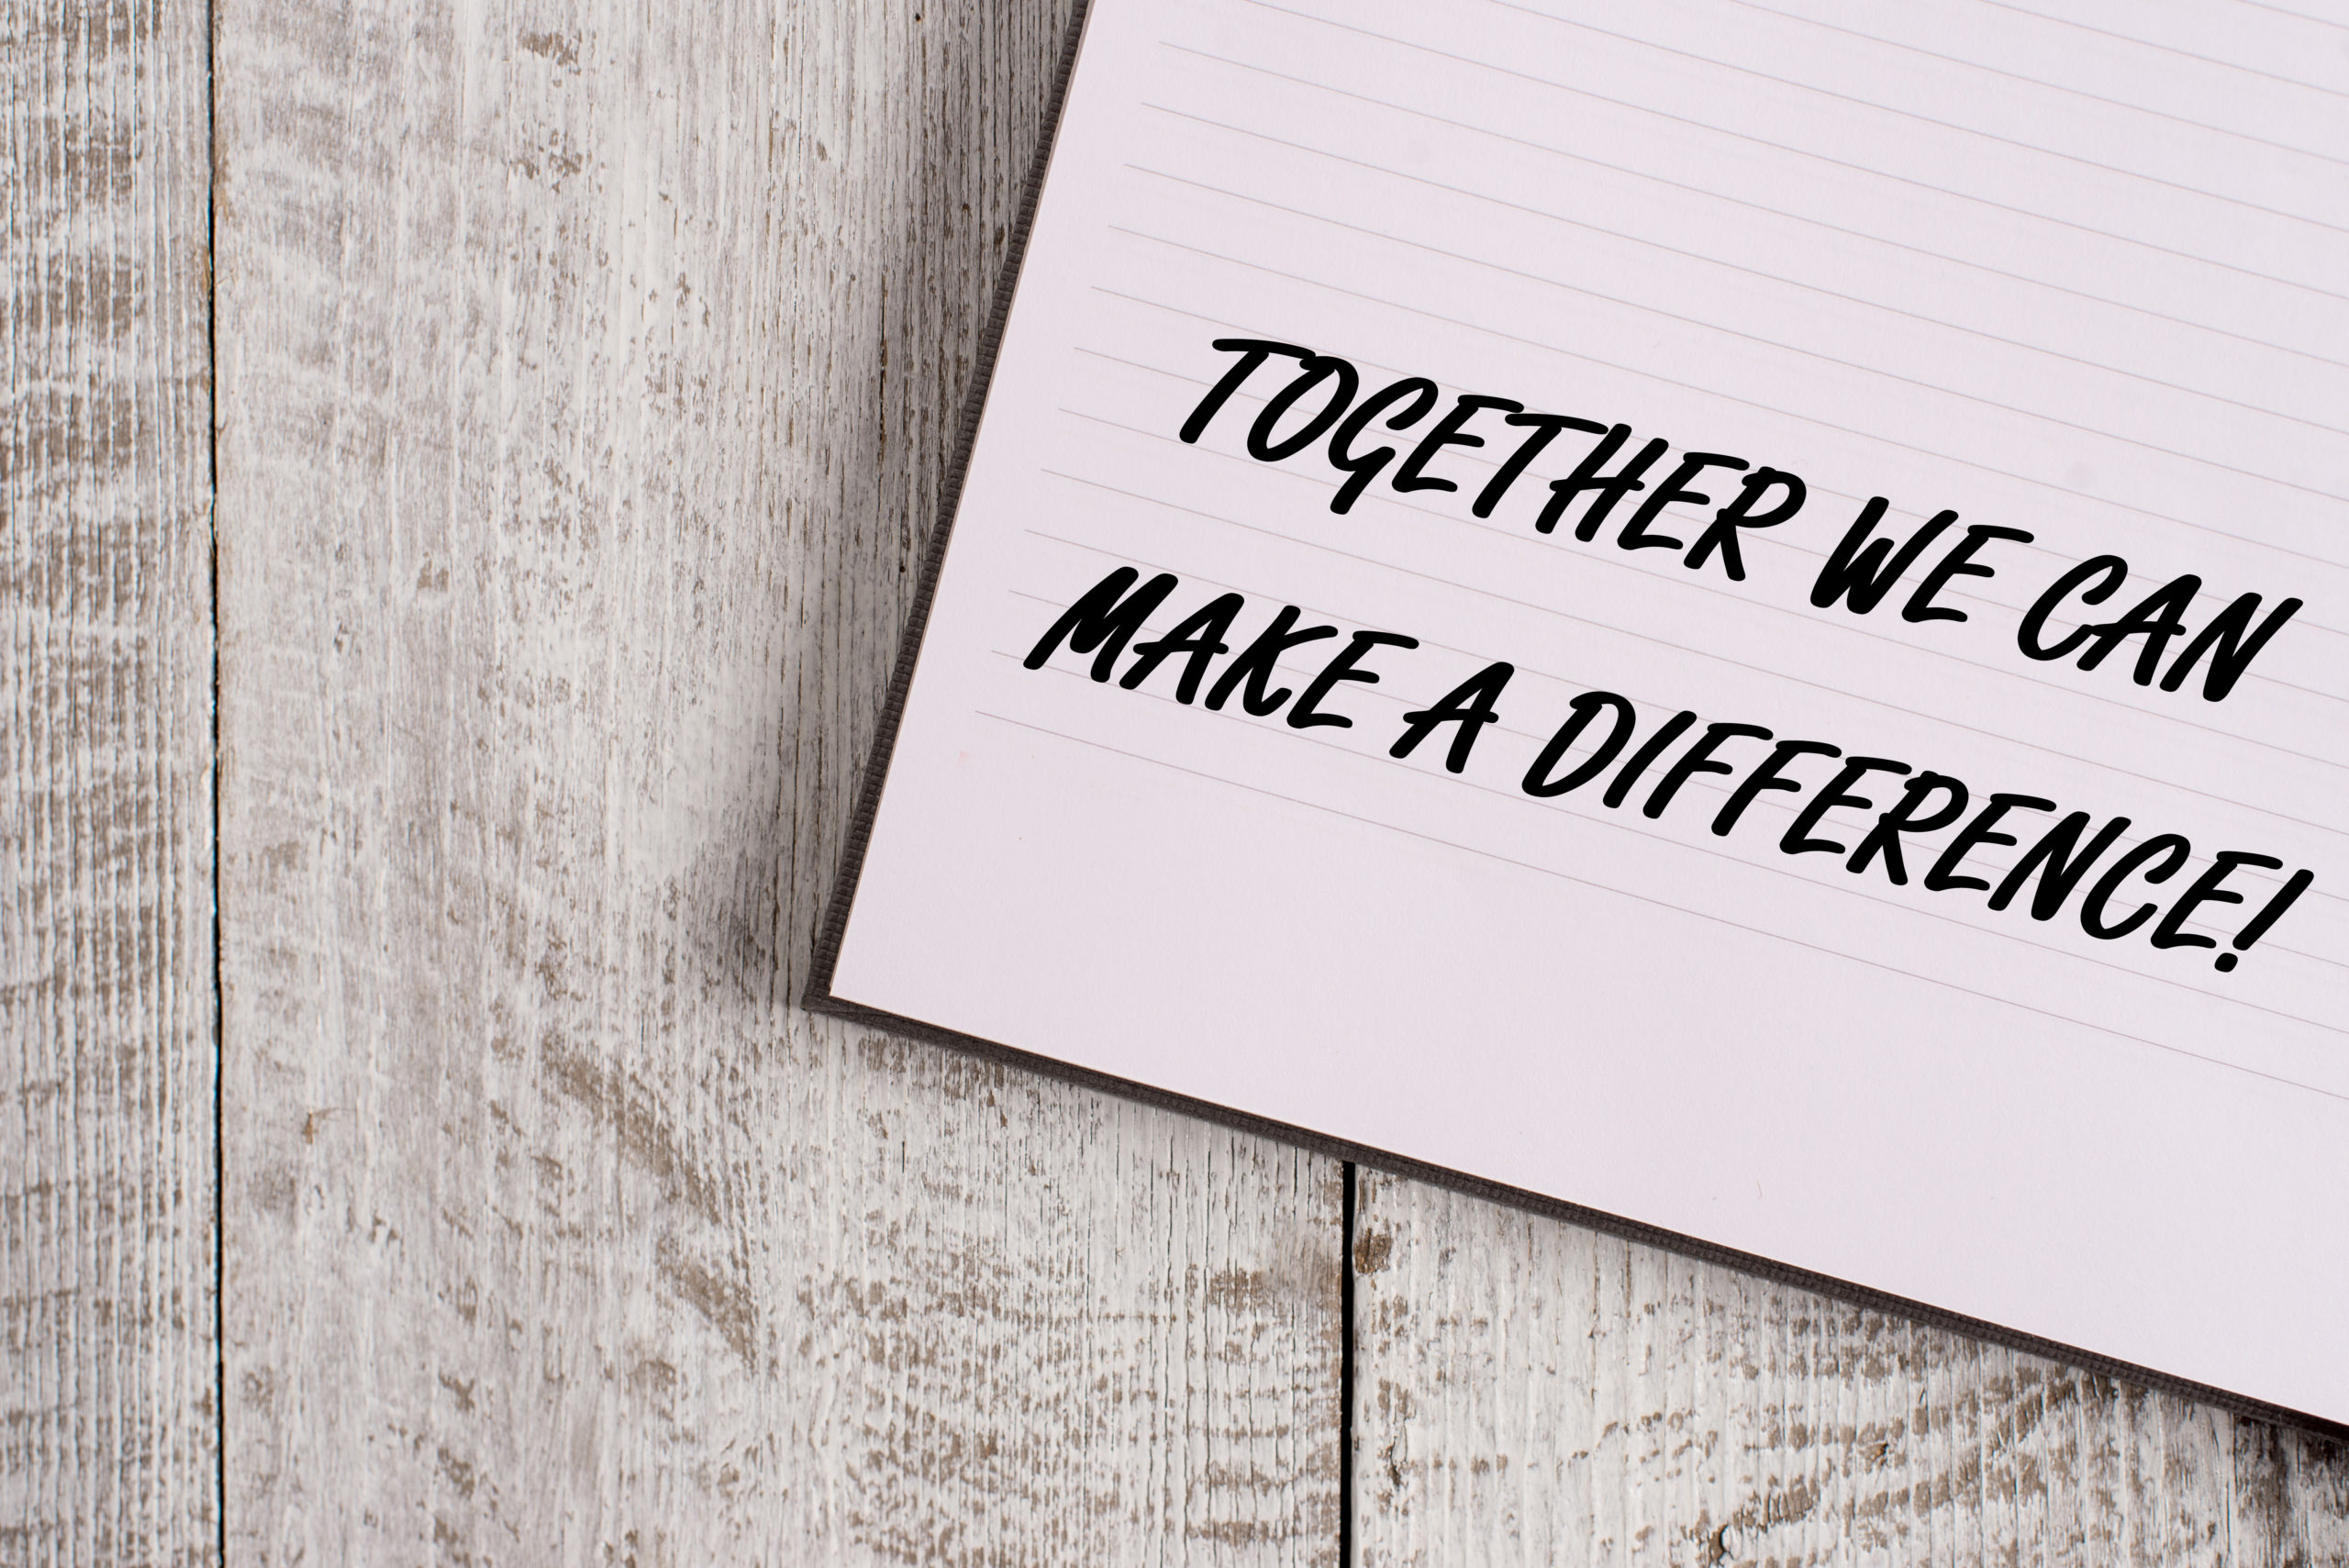 Conceptual Hand Writing Showing Together We Can Make A Difference. Business Photo Showcasing Be Very Important Some Way In Like Team Or Group Notebook Stationary Placed Above Classic Wooden Backdrop.